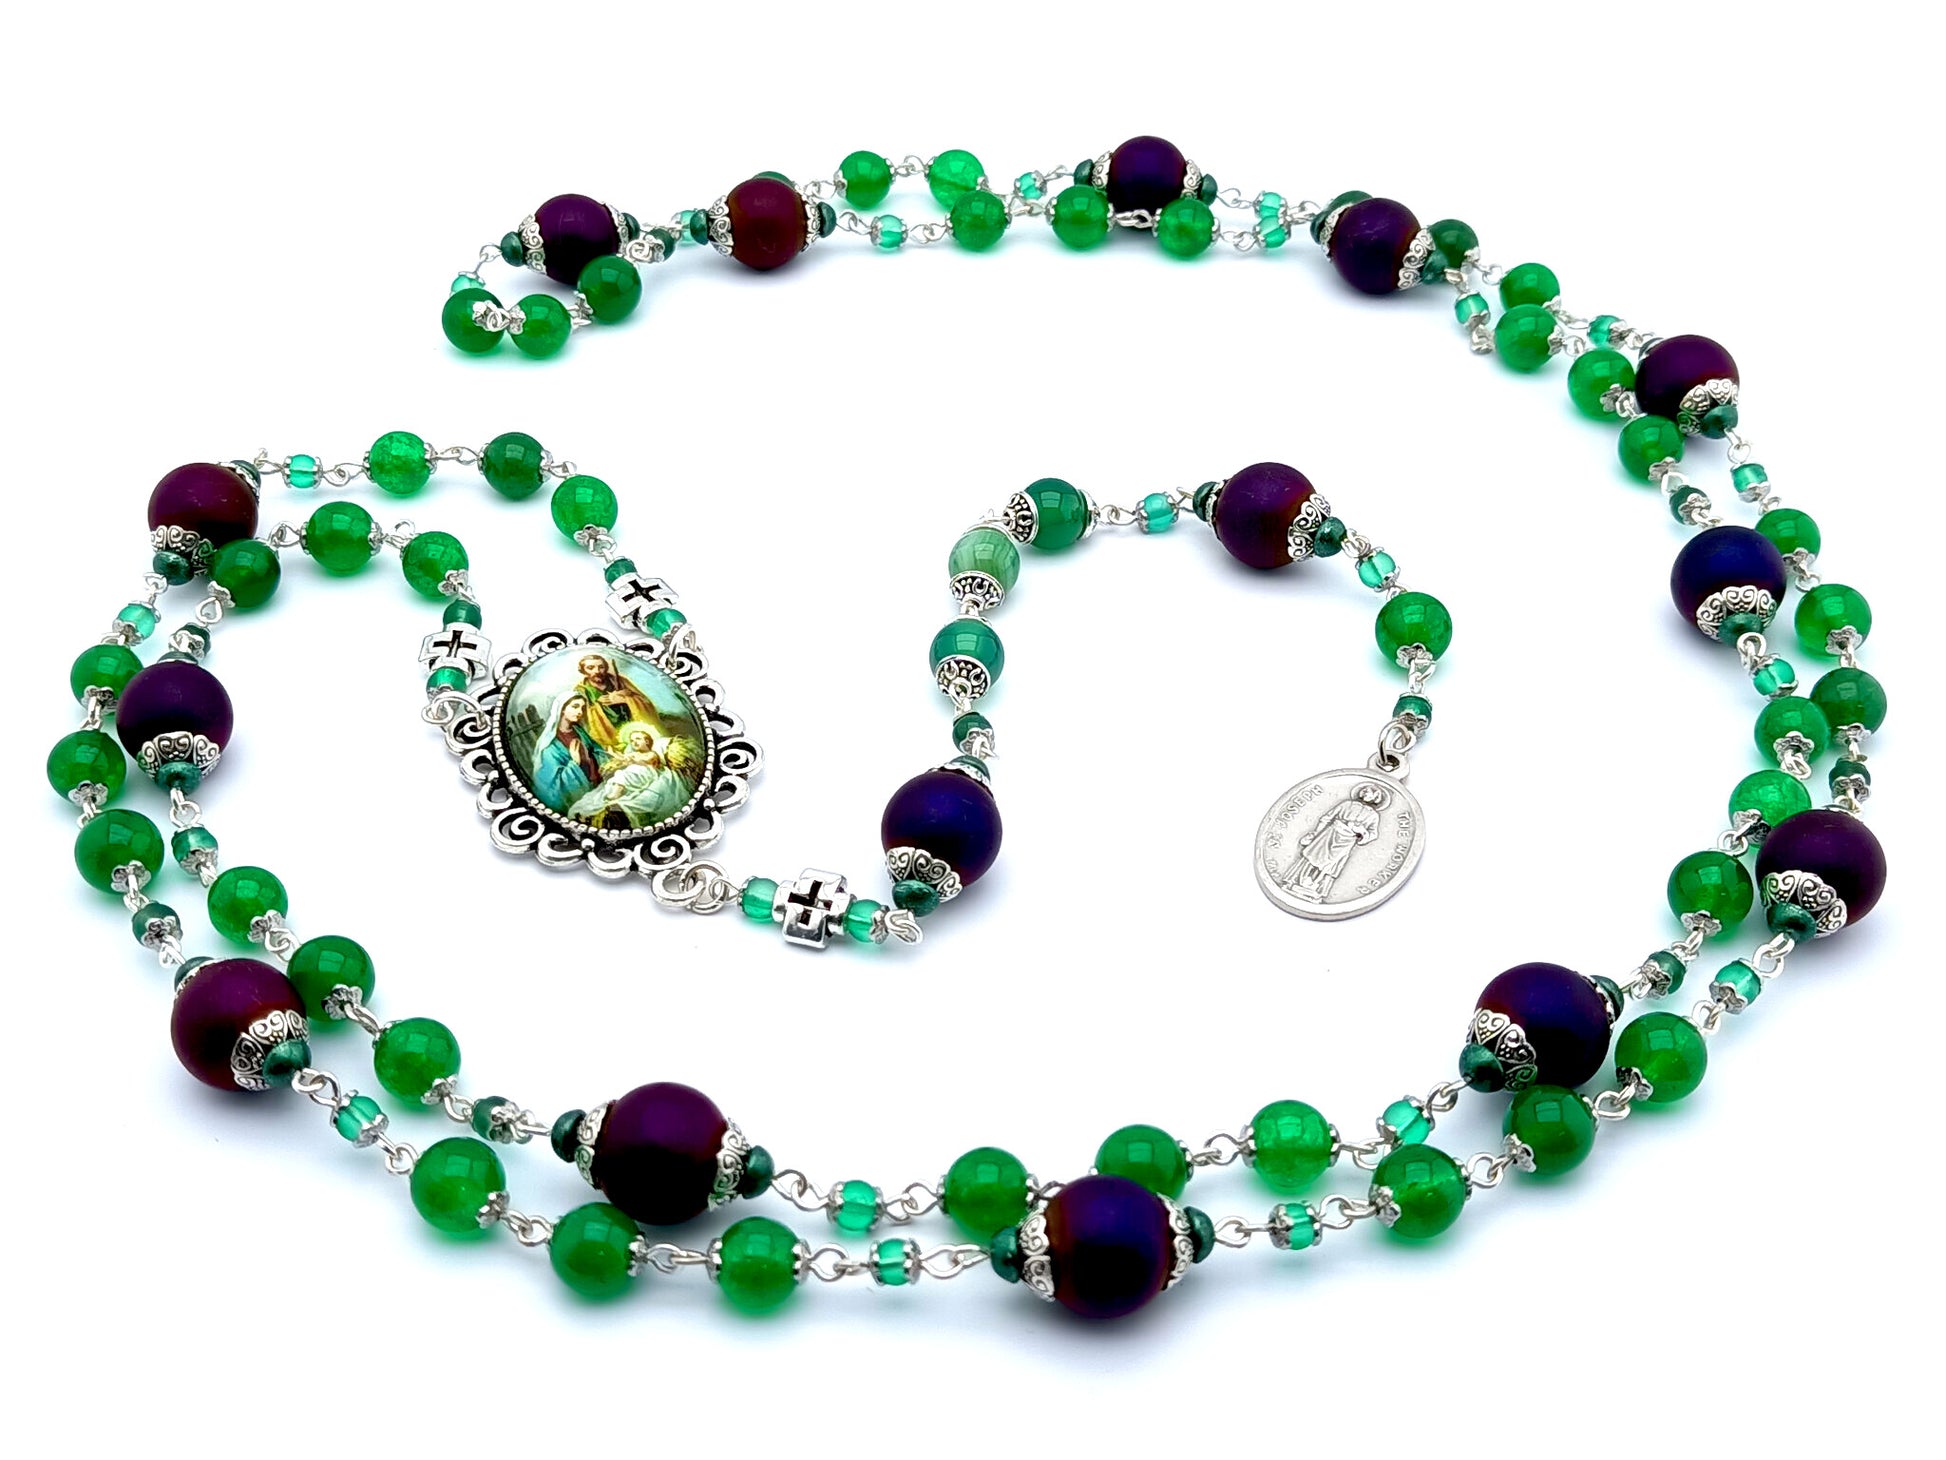 Saint Joseph unique rosary beads prayer chaplet with green agate gemstone and purple glass beads, silver picture centre medal.